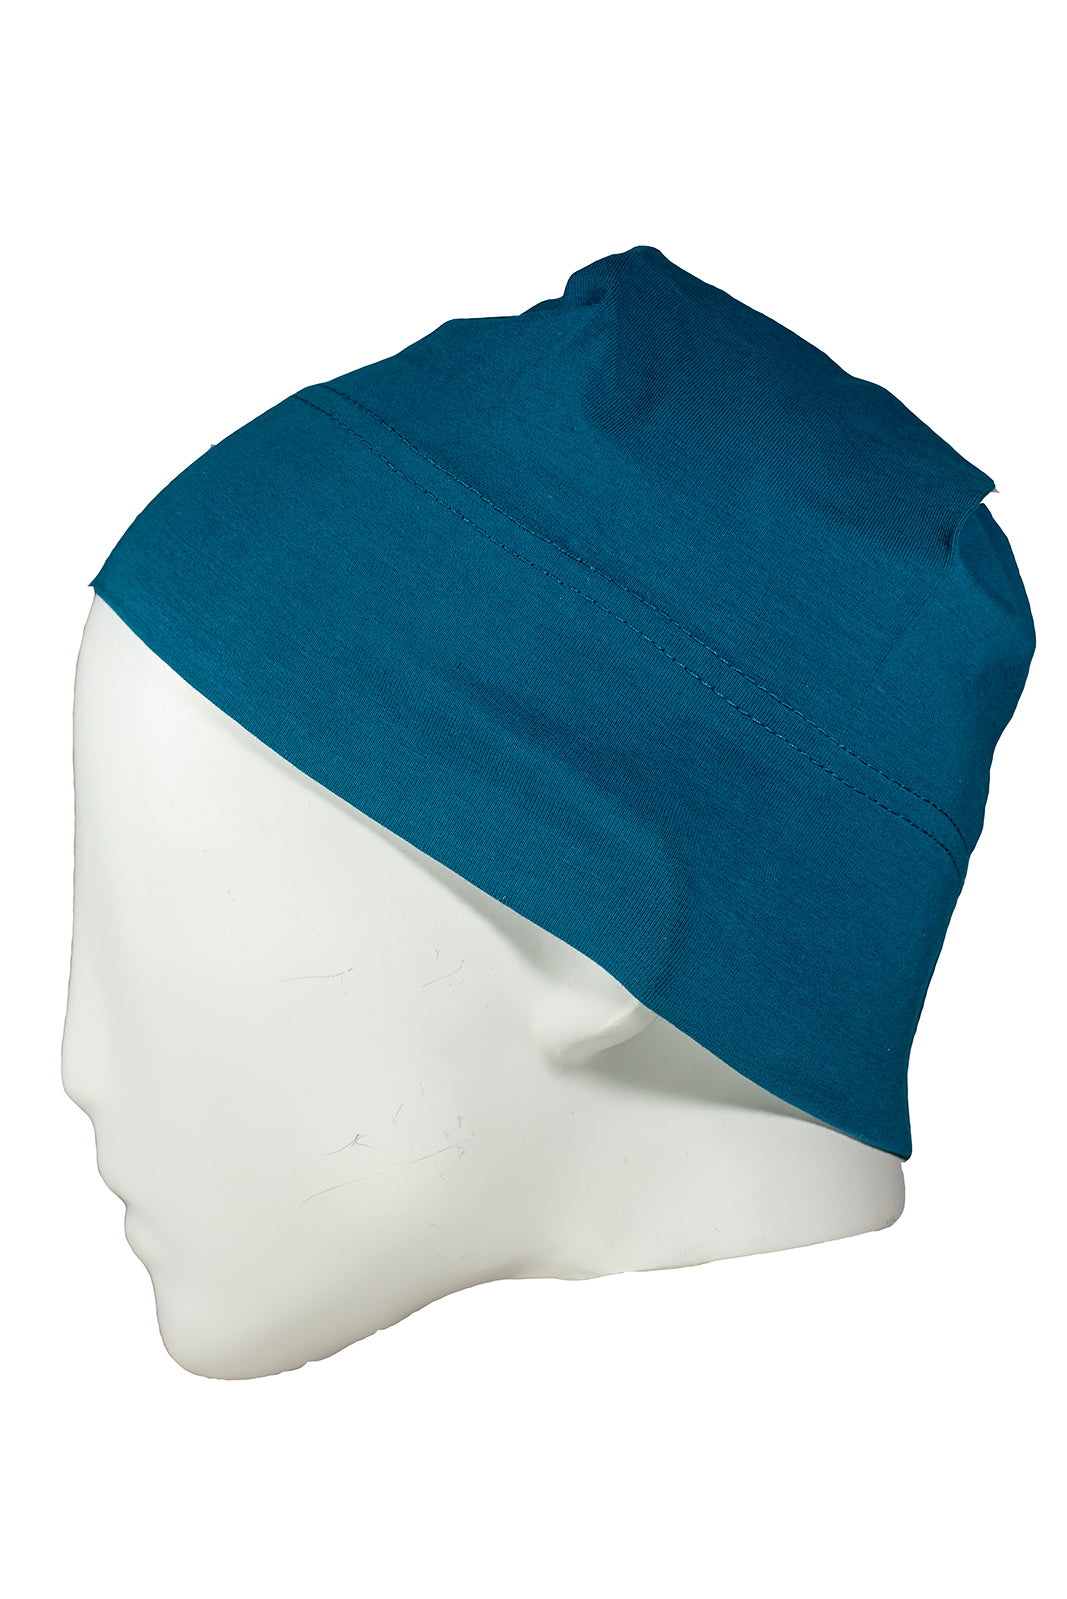 Cap in Teal xccscss.